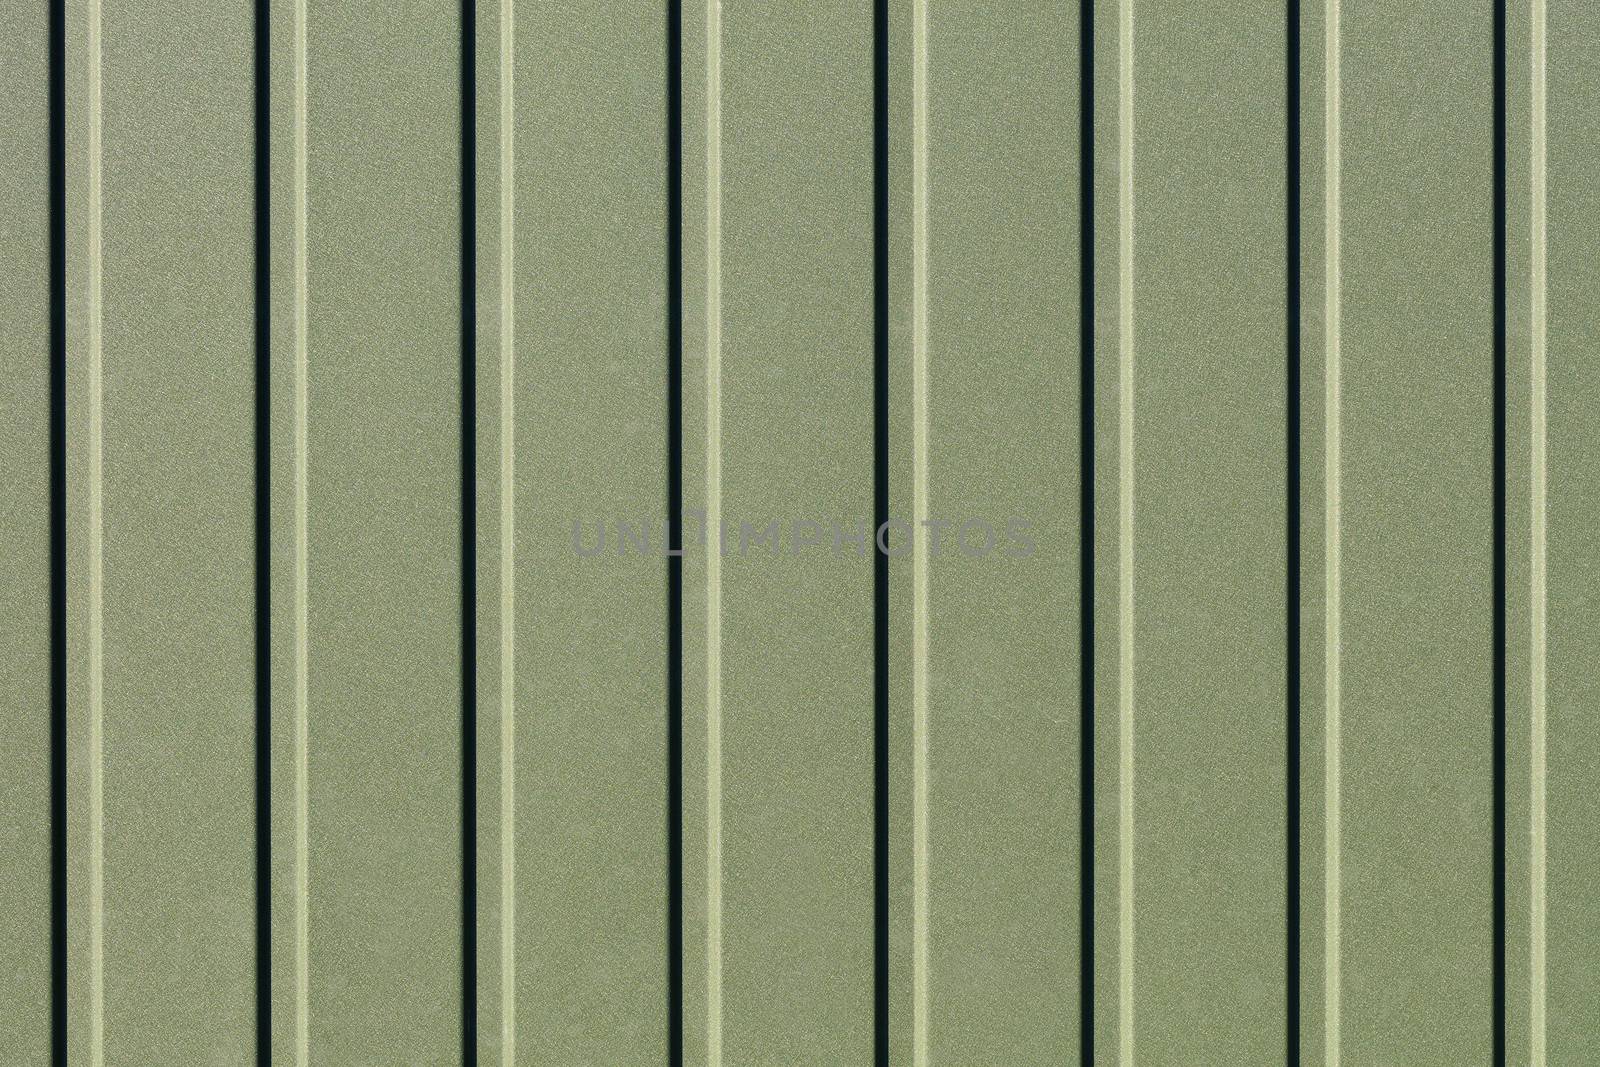 Greenery metallic fence made of corrugated steel sheet with vertical guides. Corrugated green iron sheet background close up.